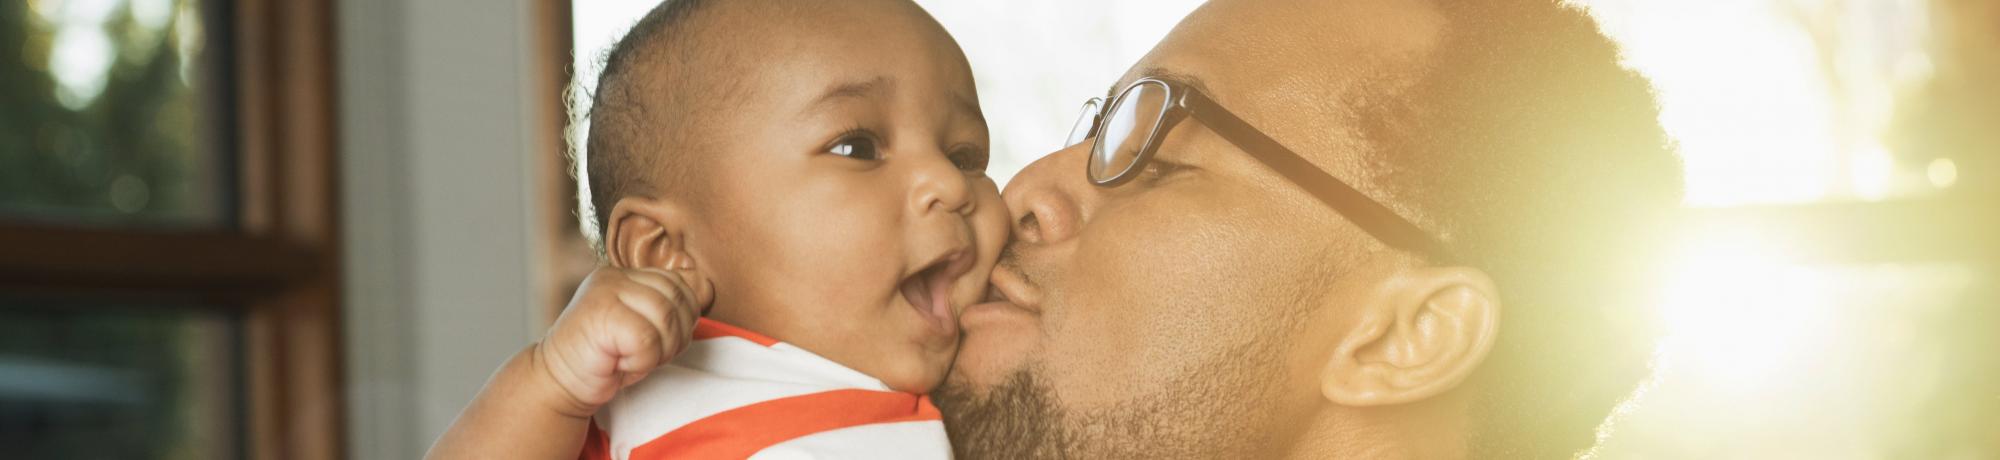 Father kissing infant